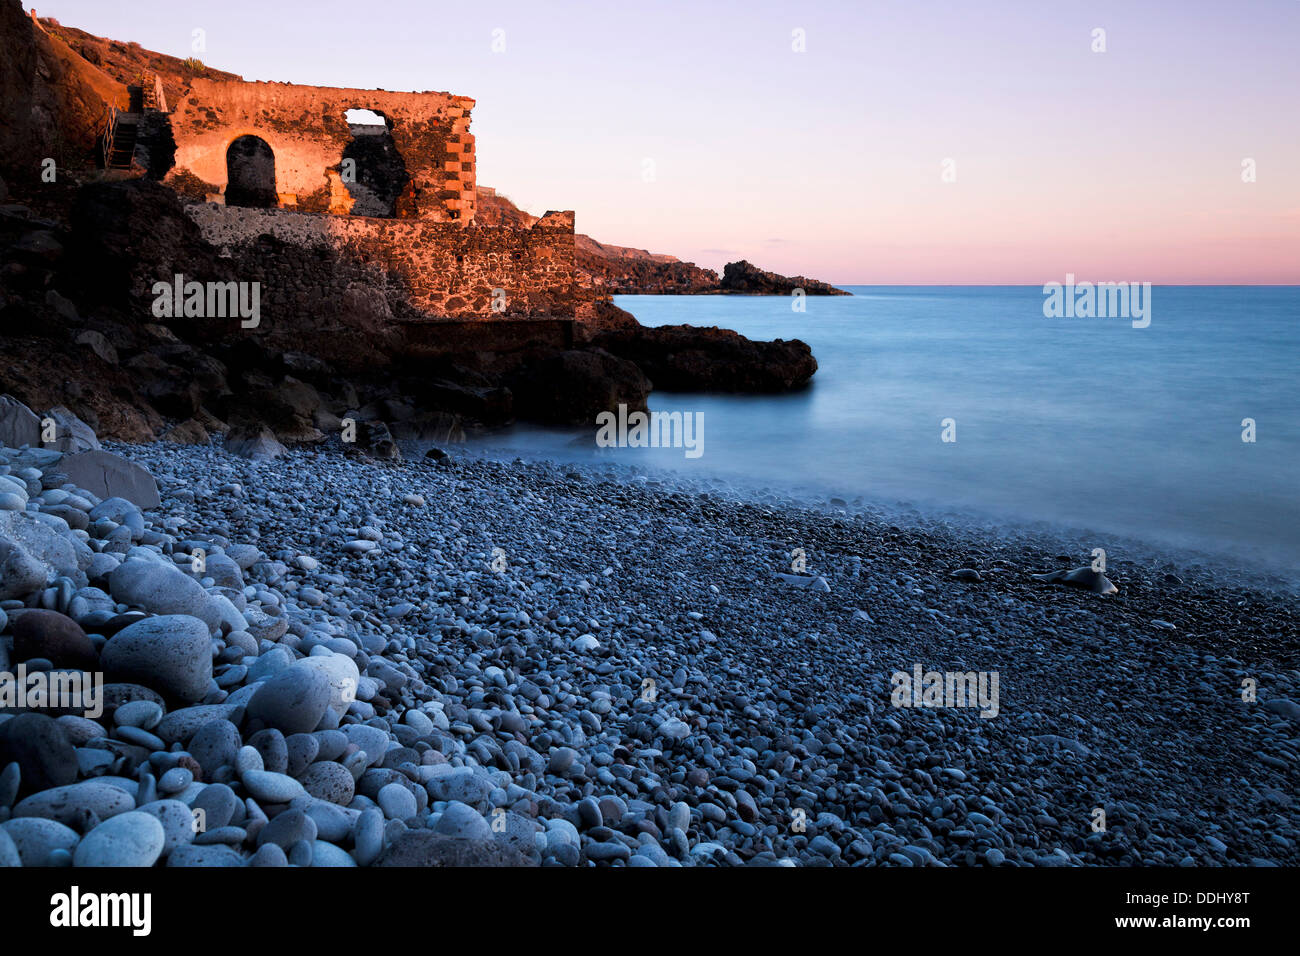 Long exposure images of the old pumphouse at Playa San juan, tenerife, Canary Islands, Spain. 10stop ND filter. Stock Photo